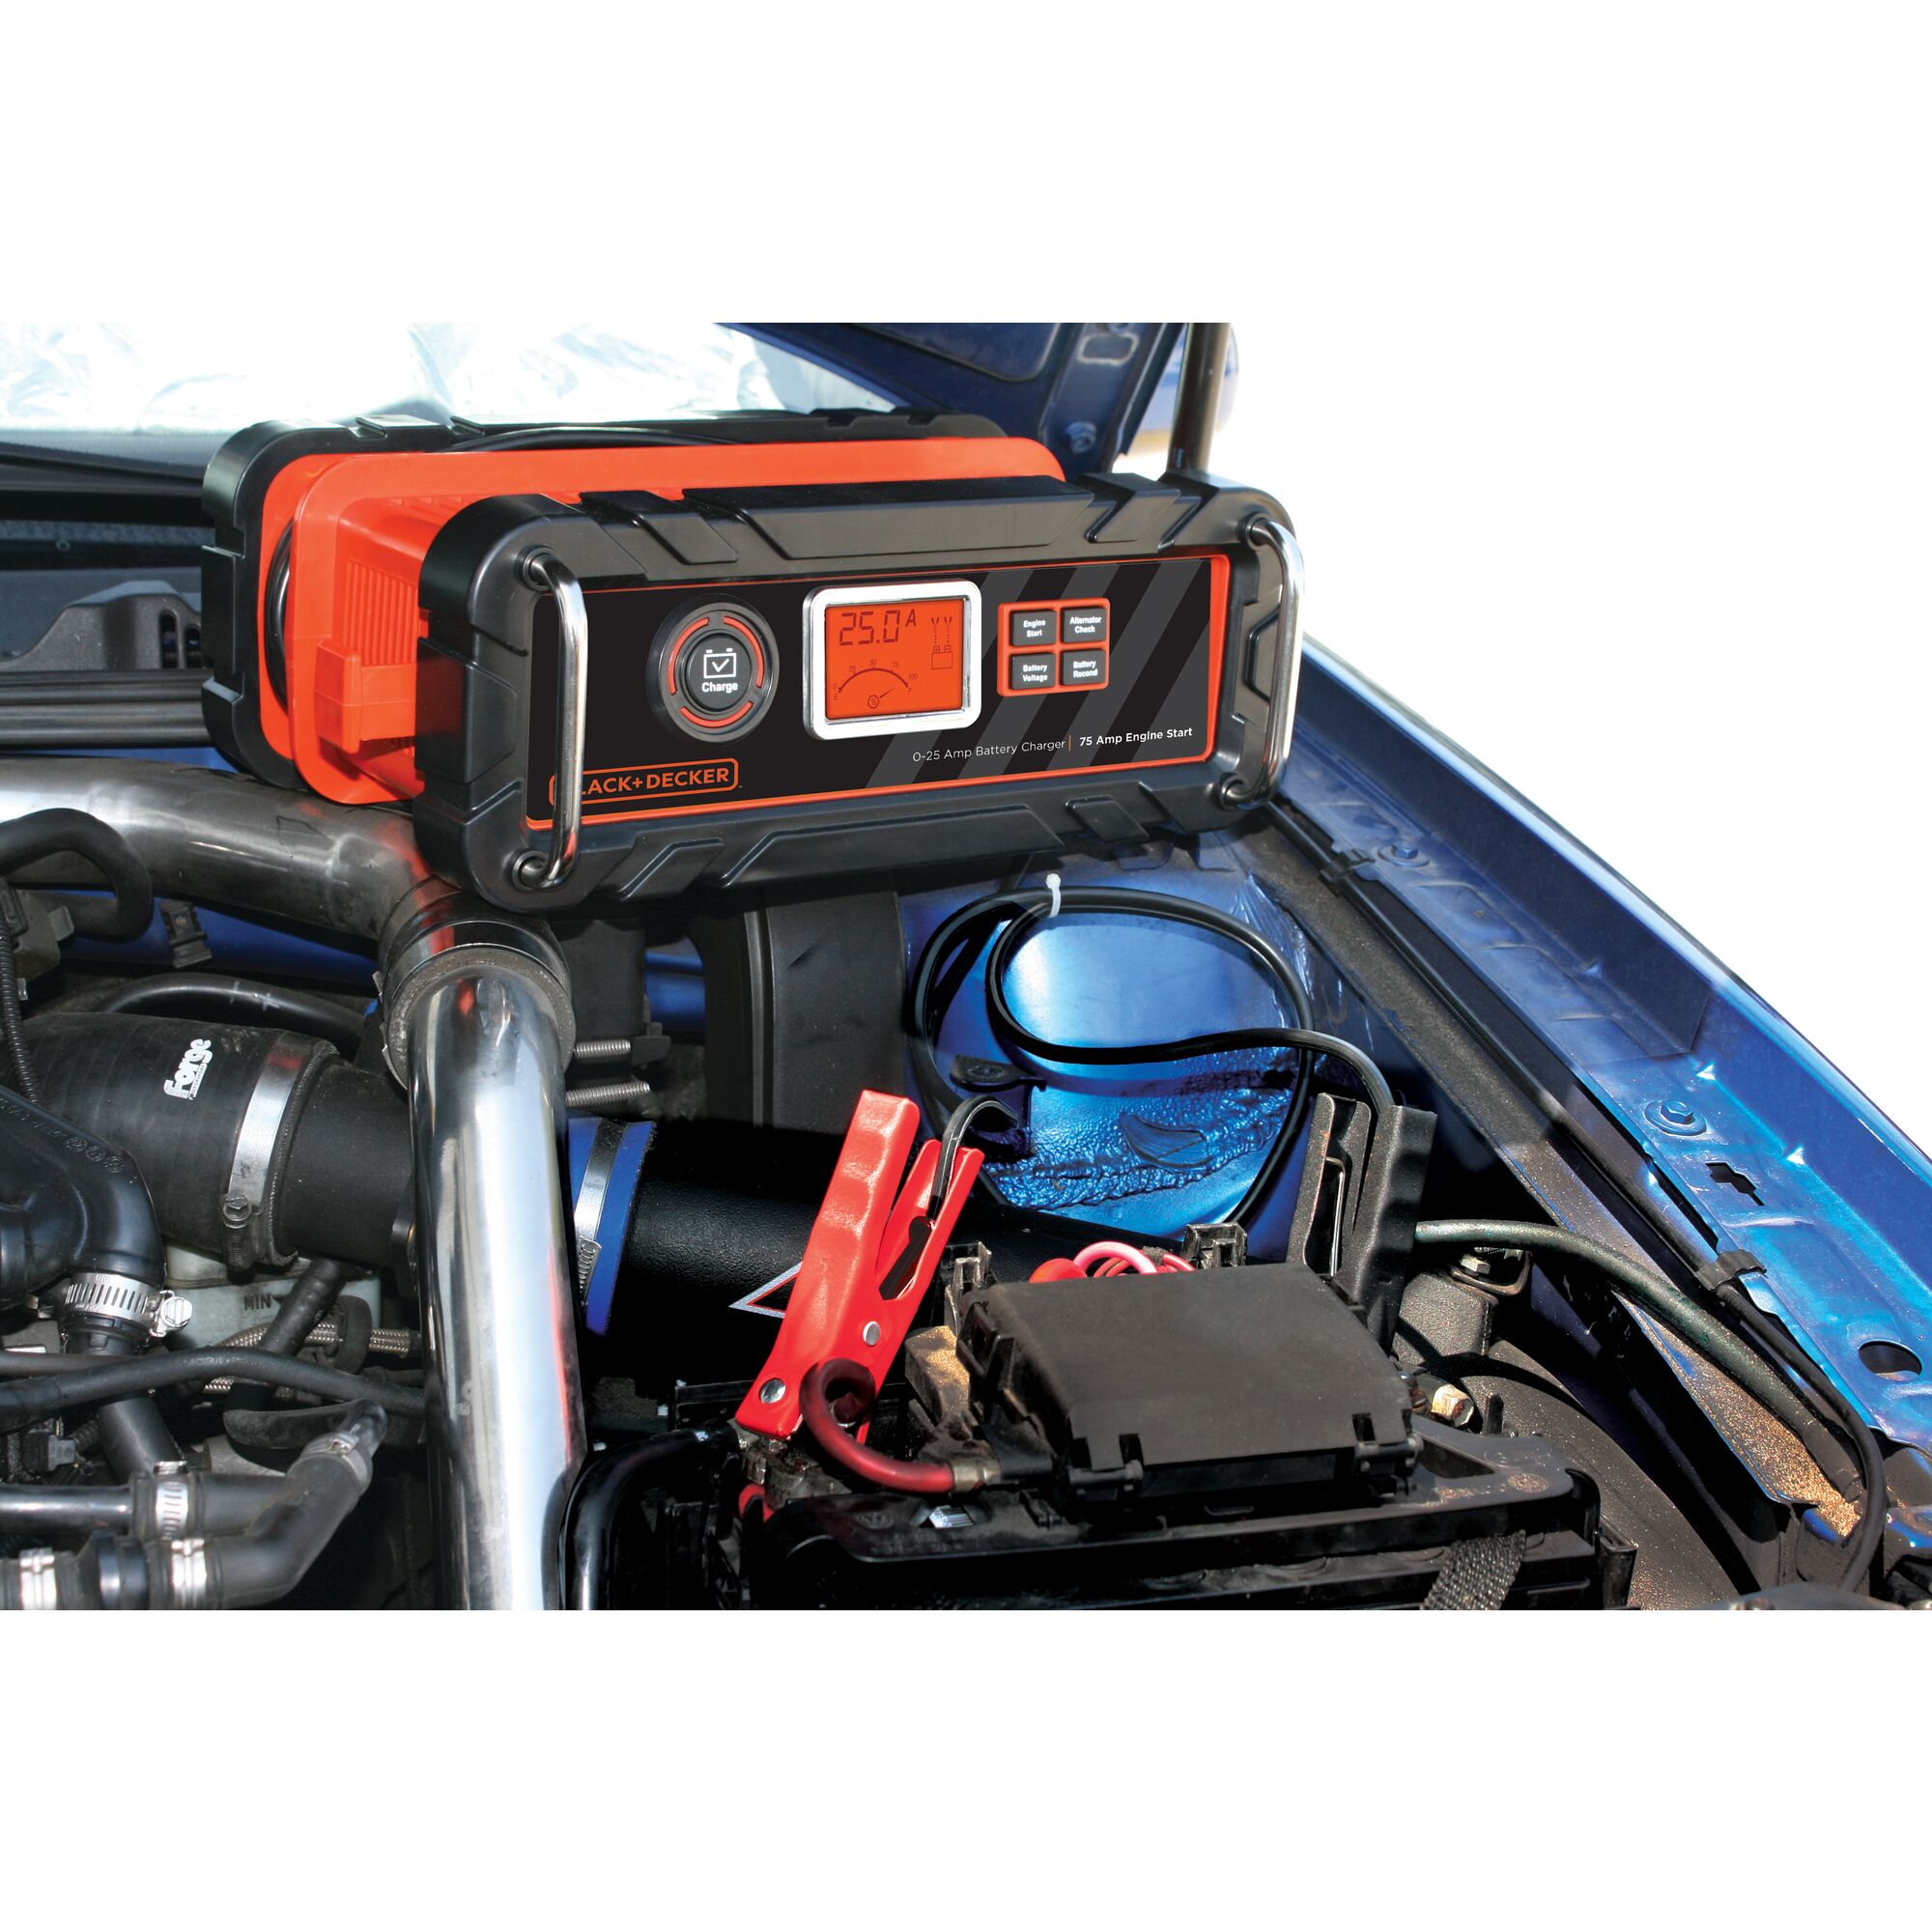 Use of the BLACK+DECKER 25 Amp Battery Charger on top of a car engine